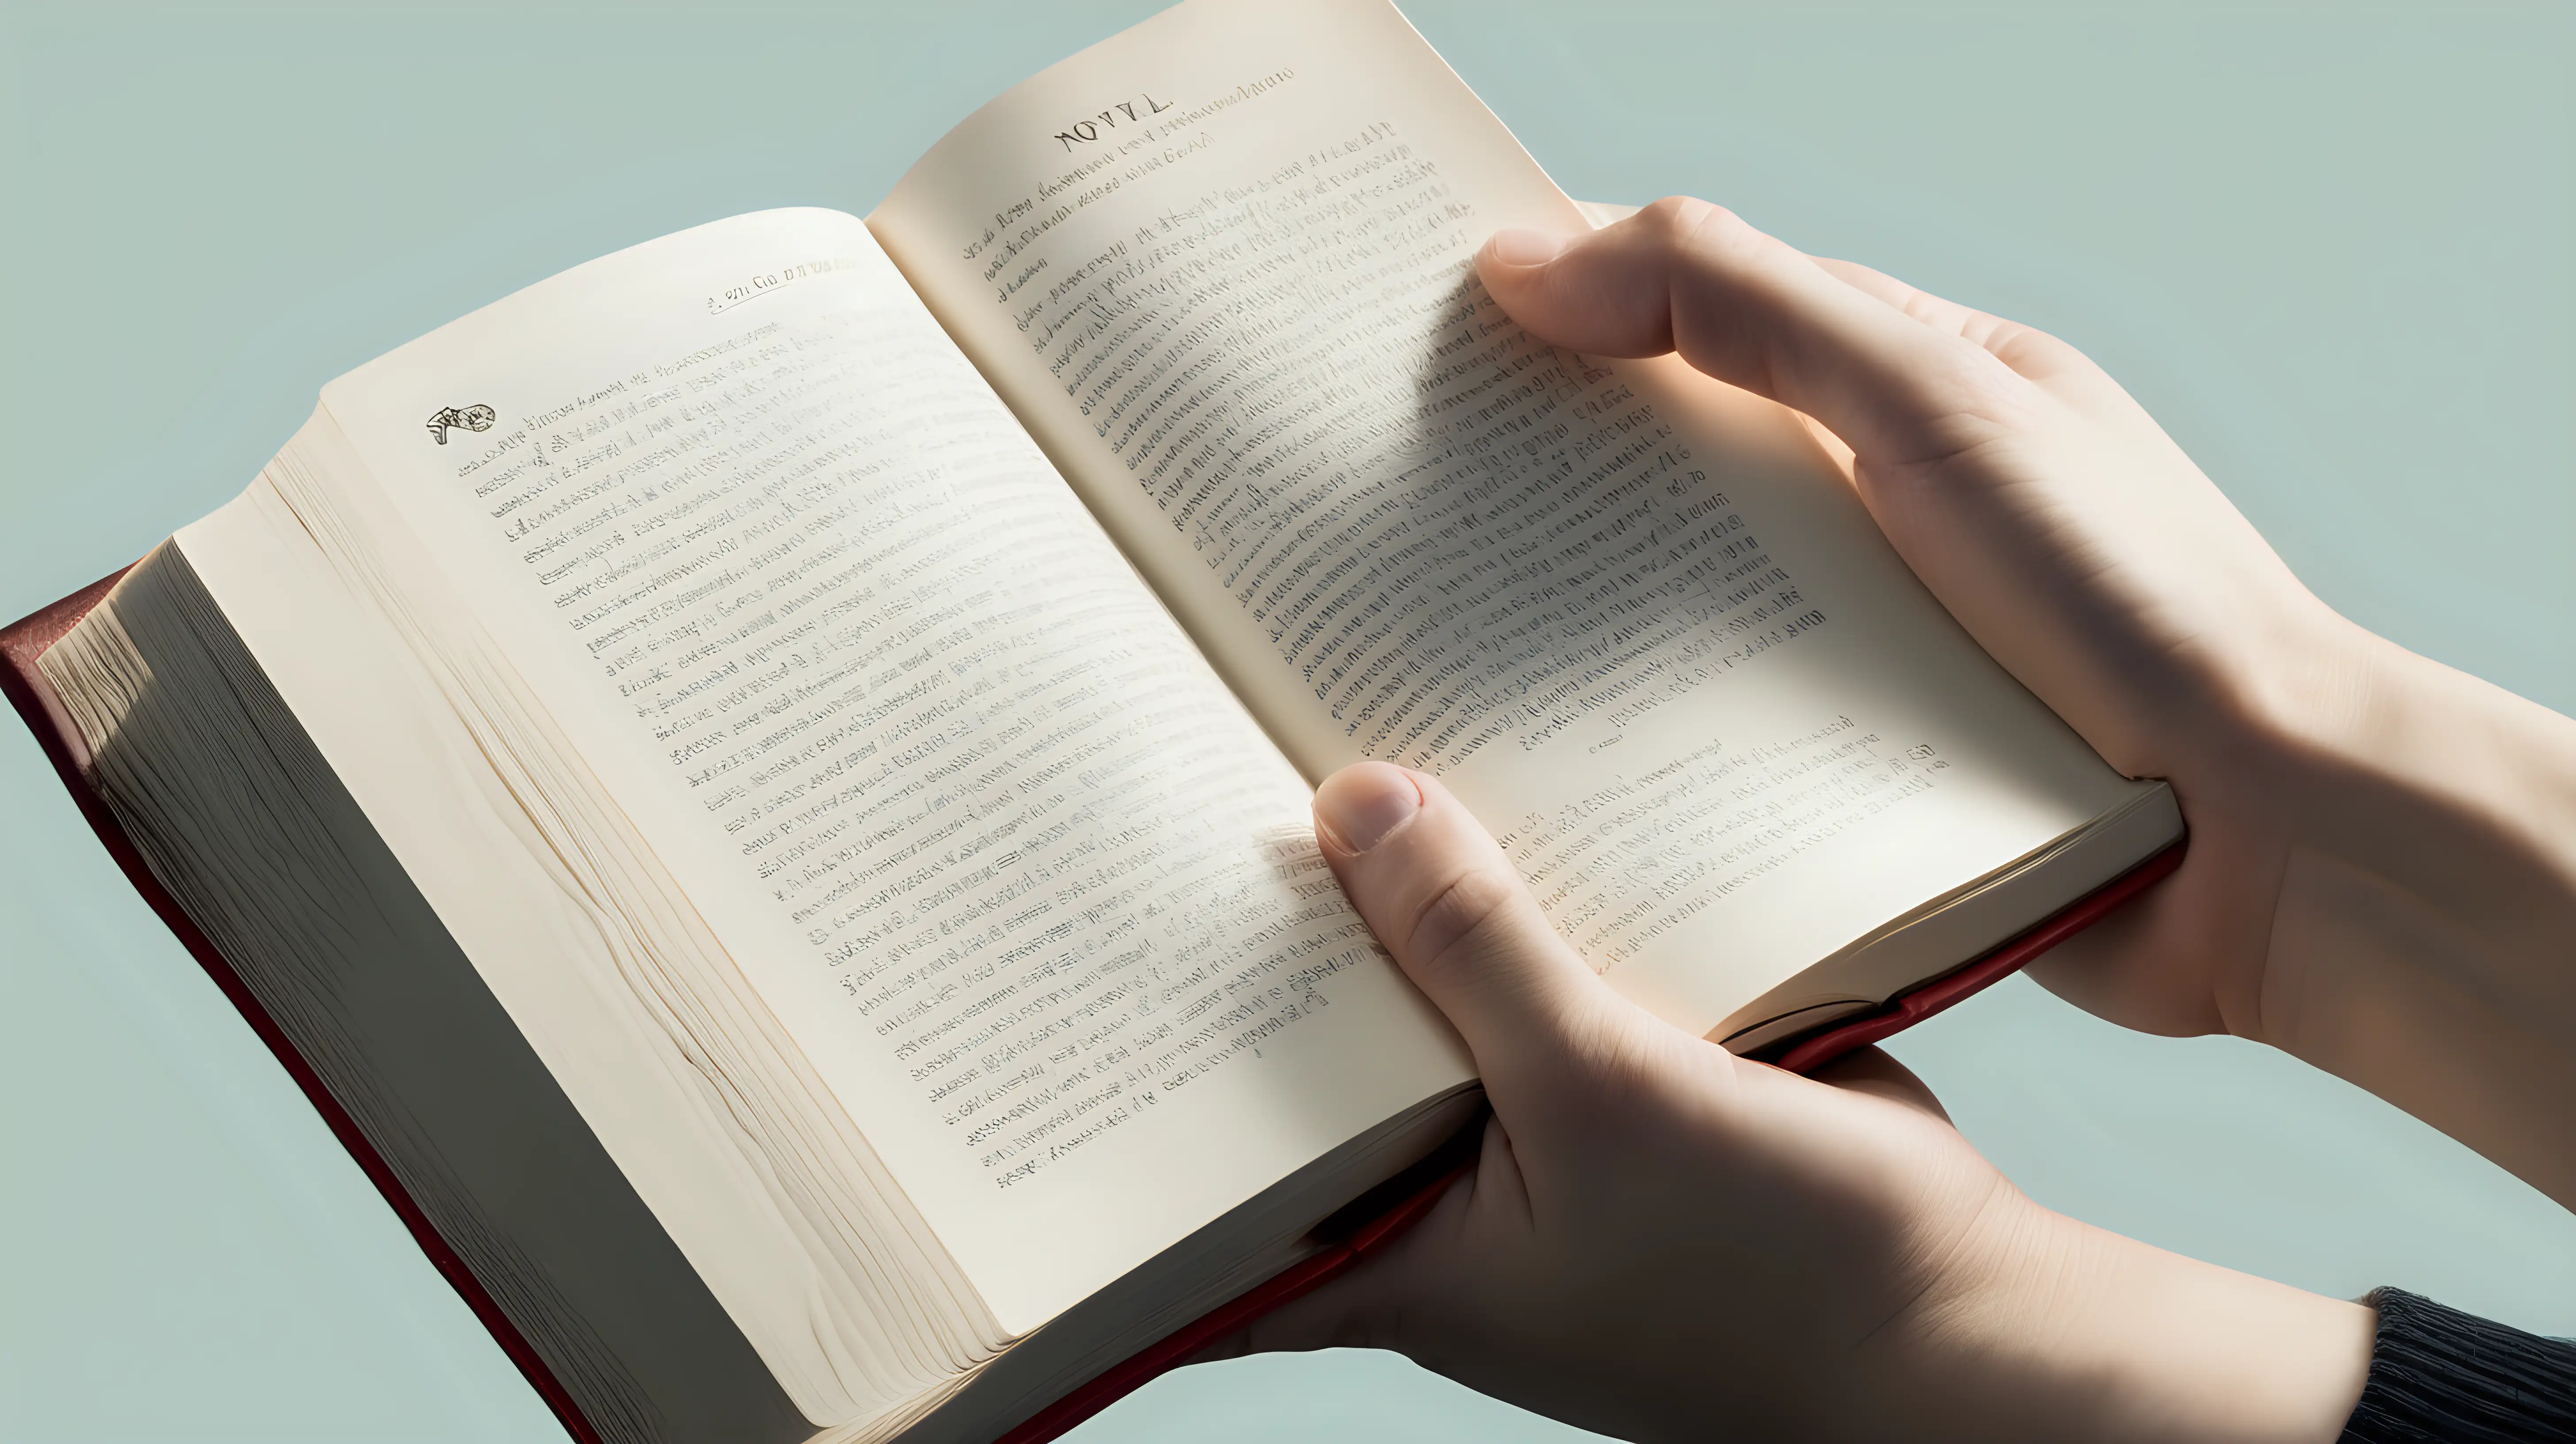 The hands of a reader holding a thick novel, showcasing the weight and volume of the book.